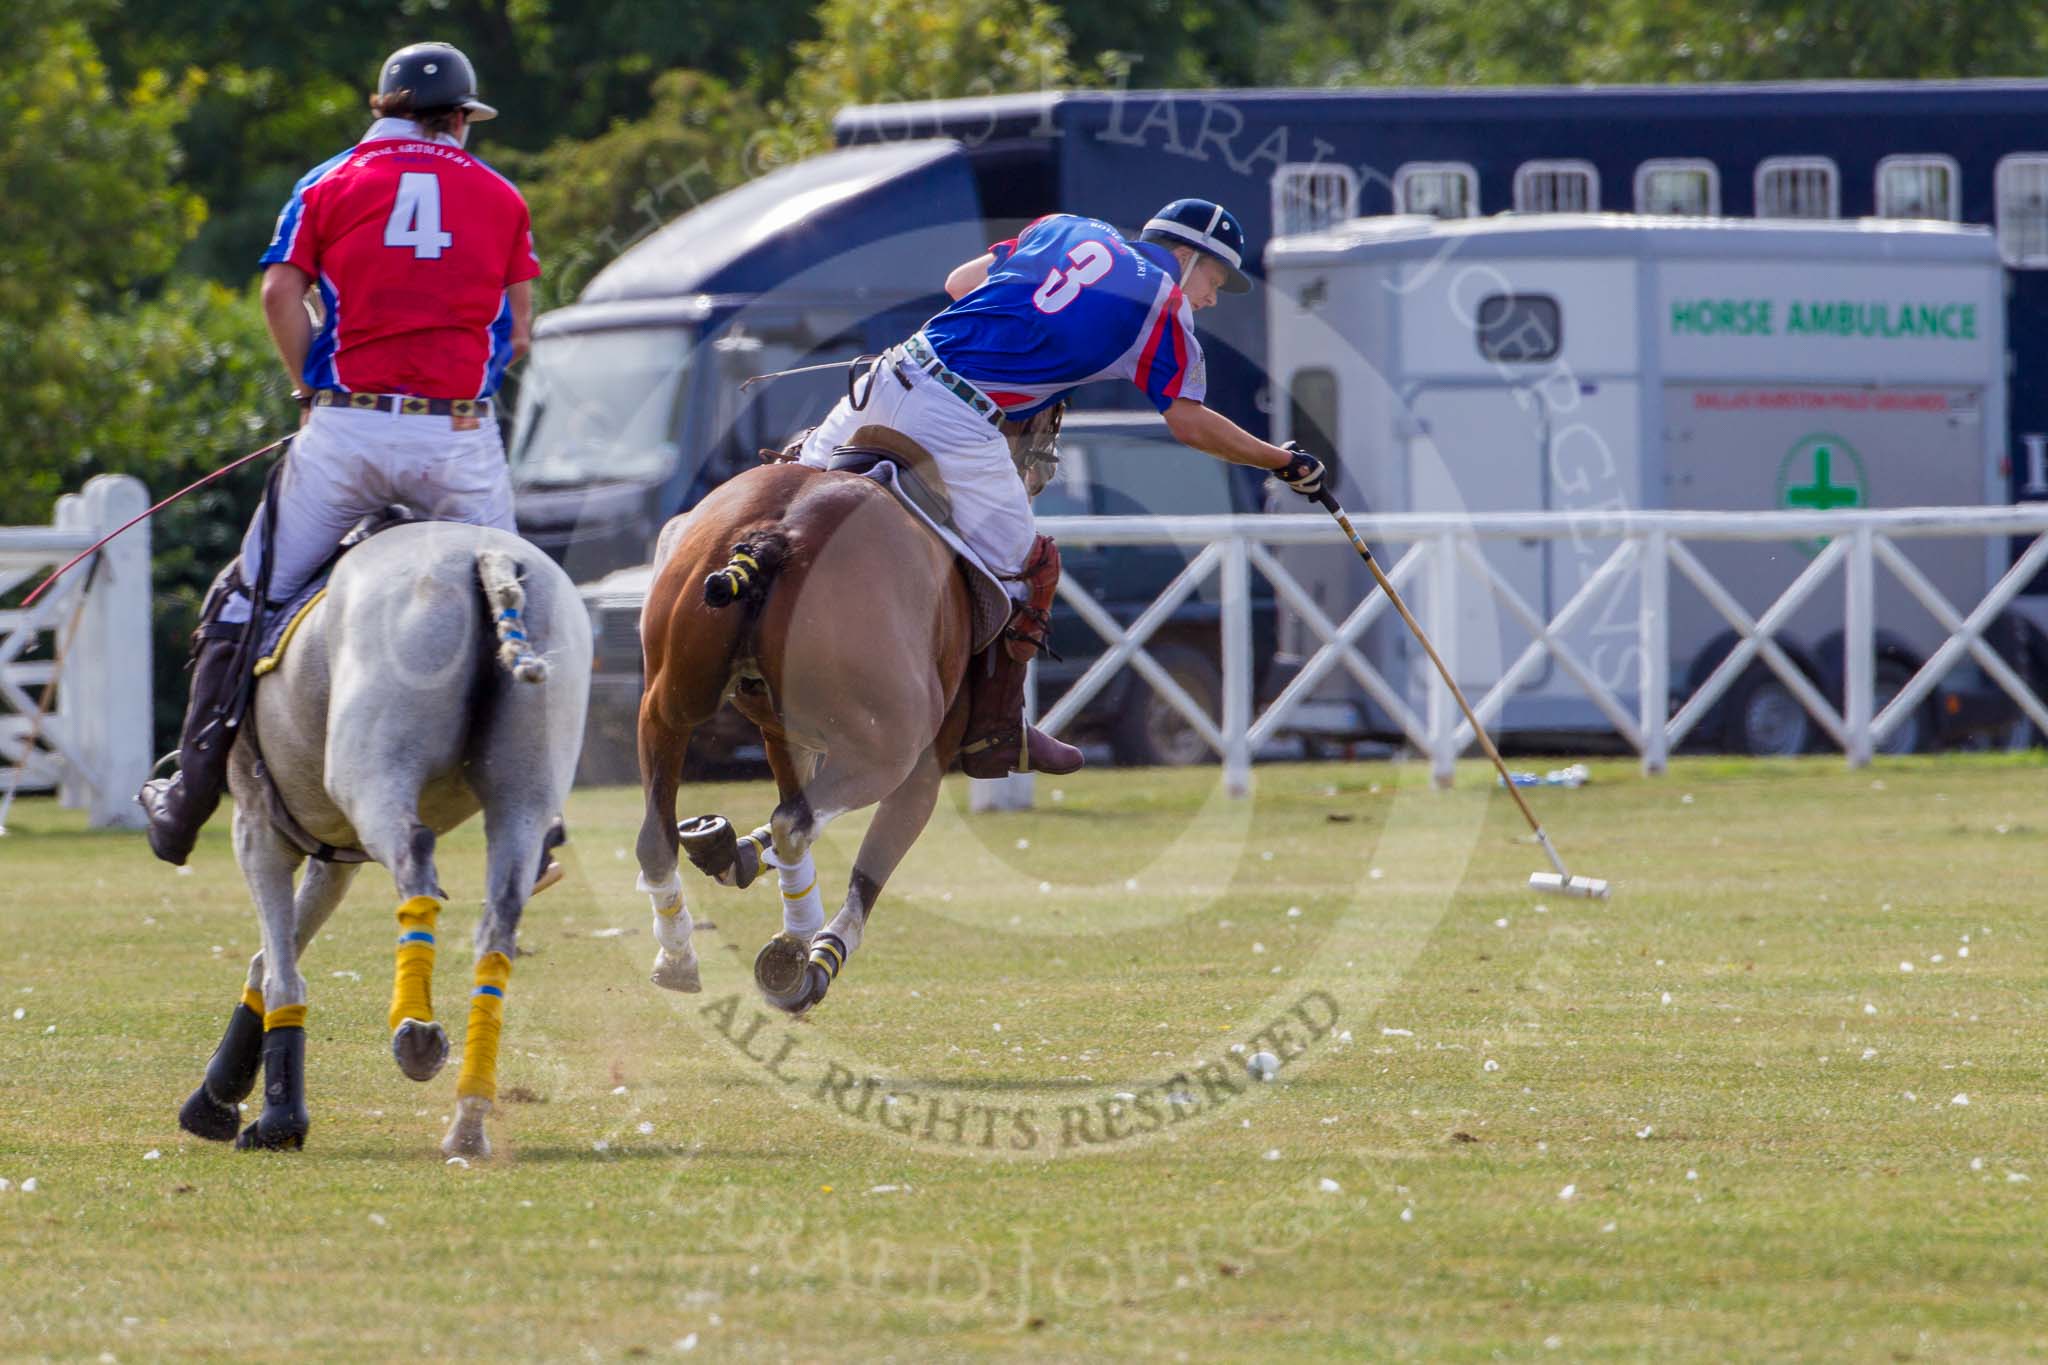 DBPC Polo in the Park 2013.
Dallas Burston Polo Club, ,
Southam,
Warwickshire,
United Kingdom,
on 01 September 2013 at 14:36, image #409